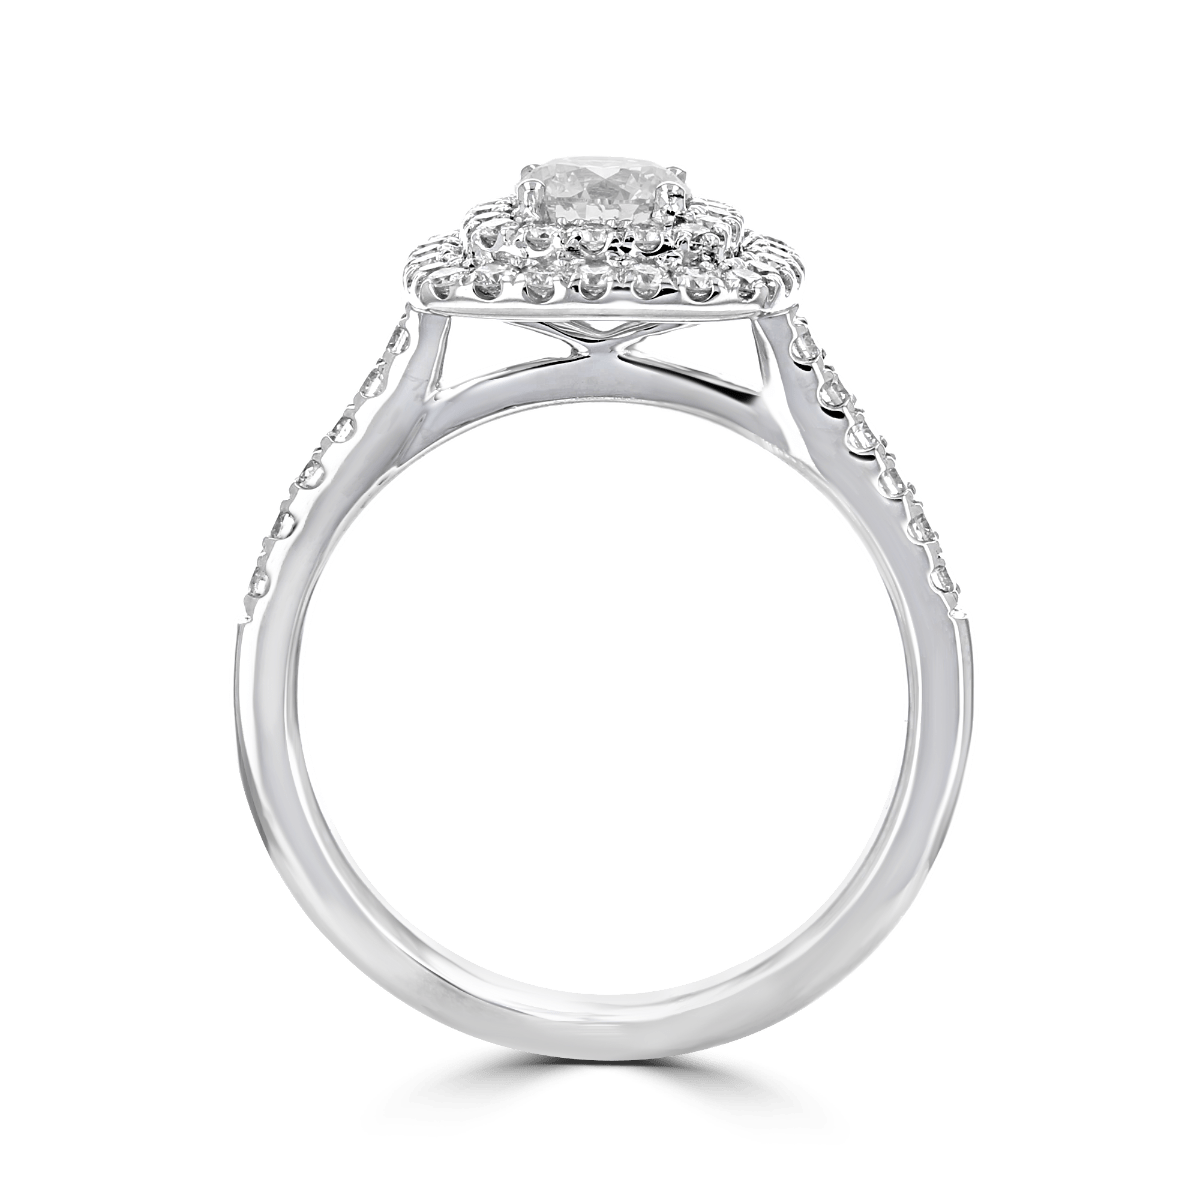 JULEVE 14KT WHITE GOLD 0.80 CTW DIAMOND DOUBLE SQUARE HALO RING 4,4.5,5,5.5,6,6.5,7,7.5,8,8.5,9